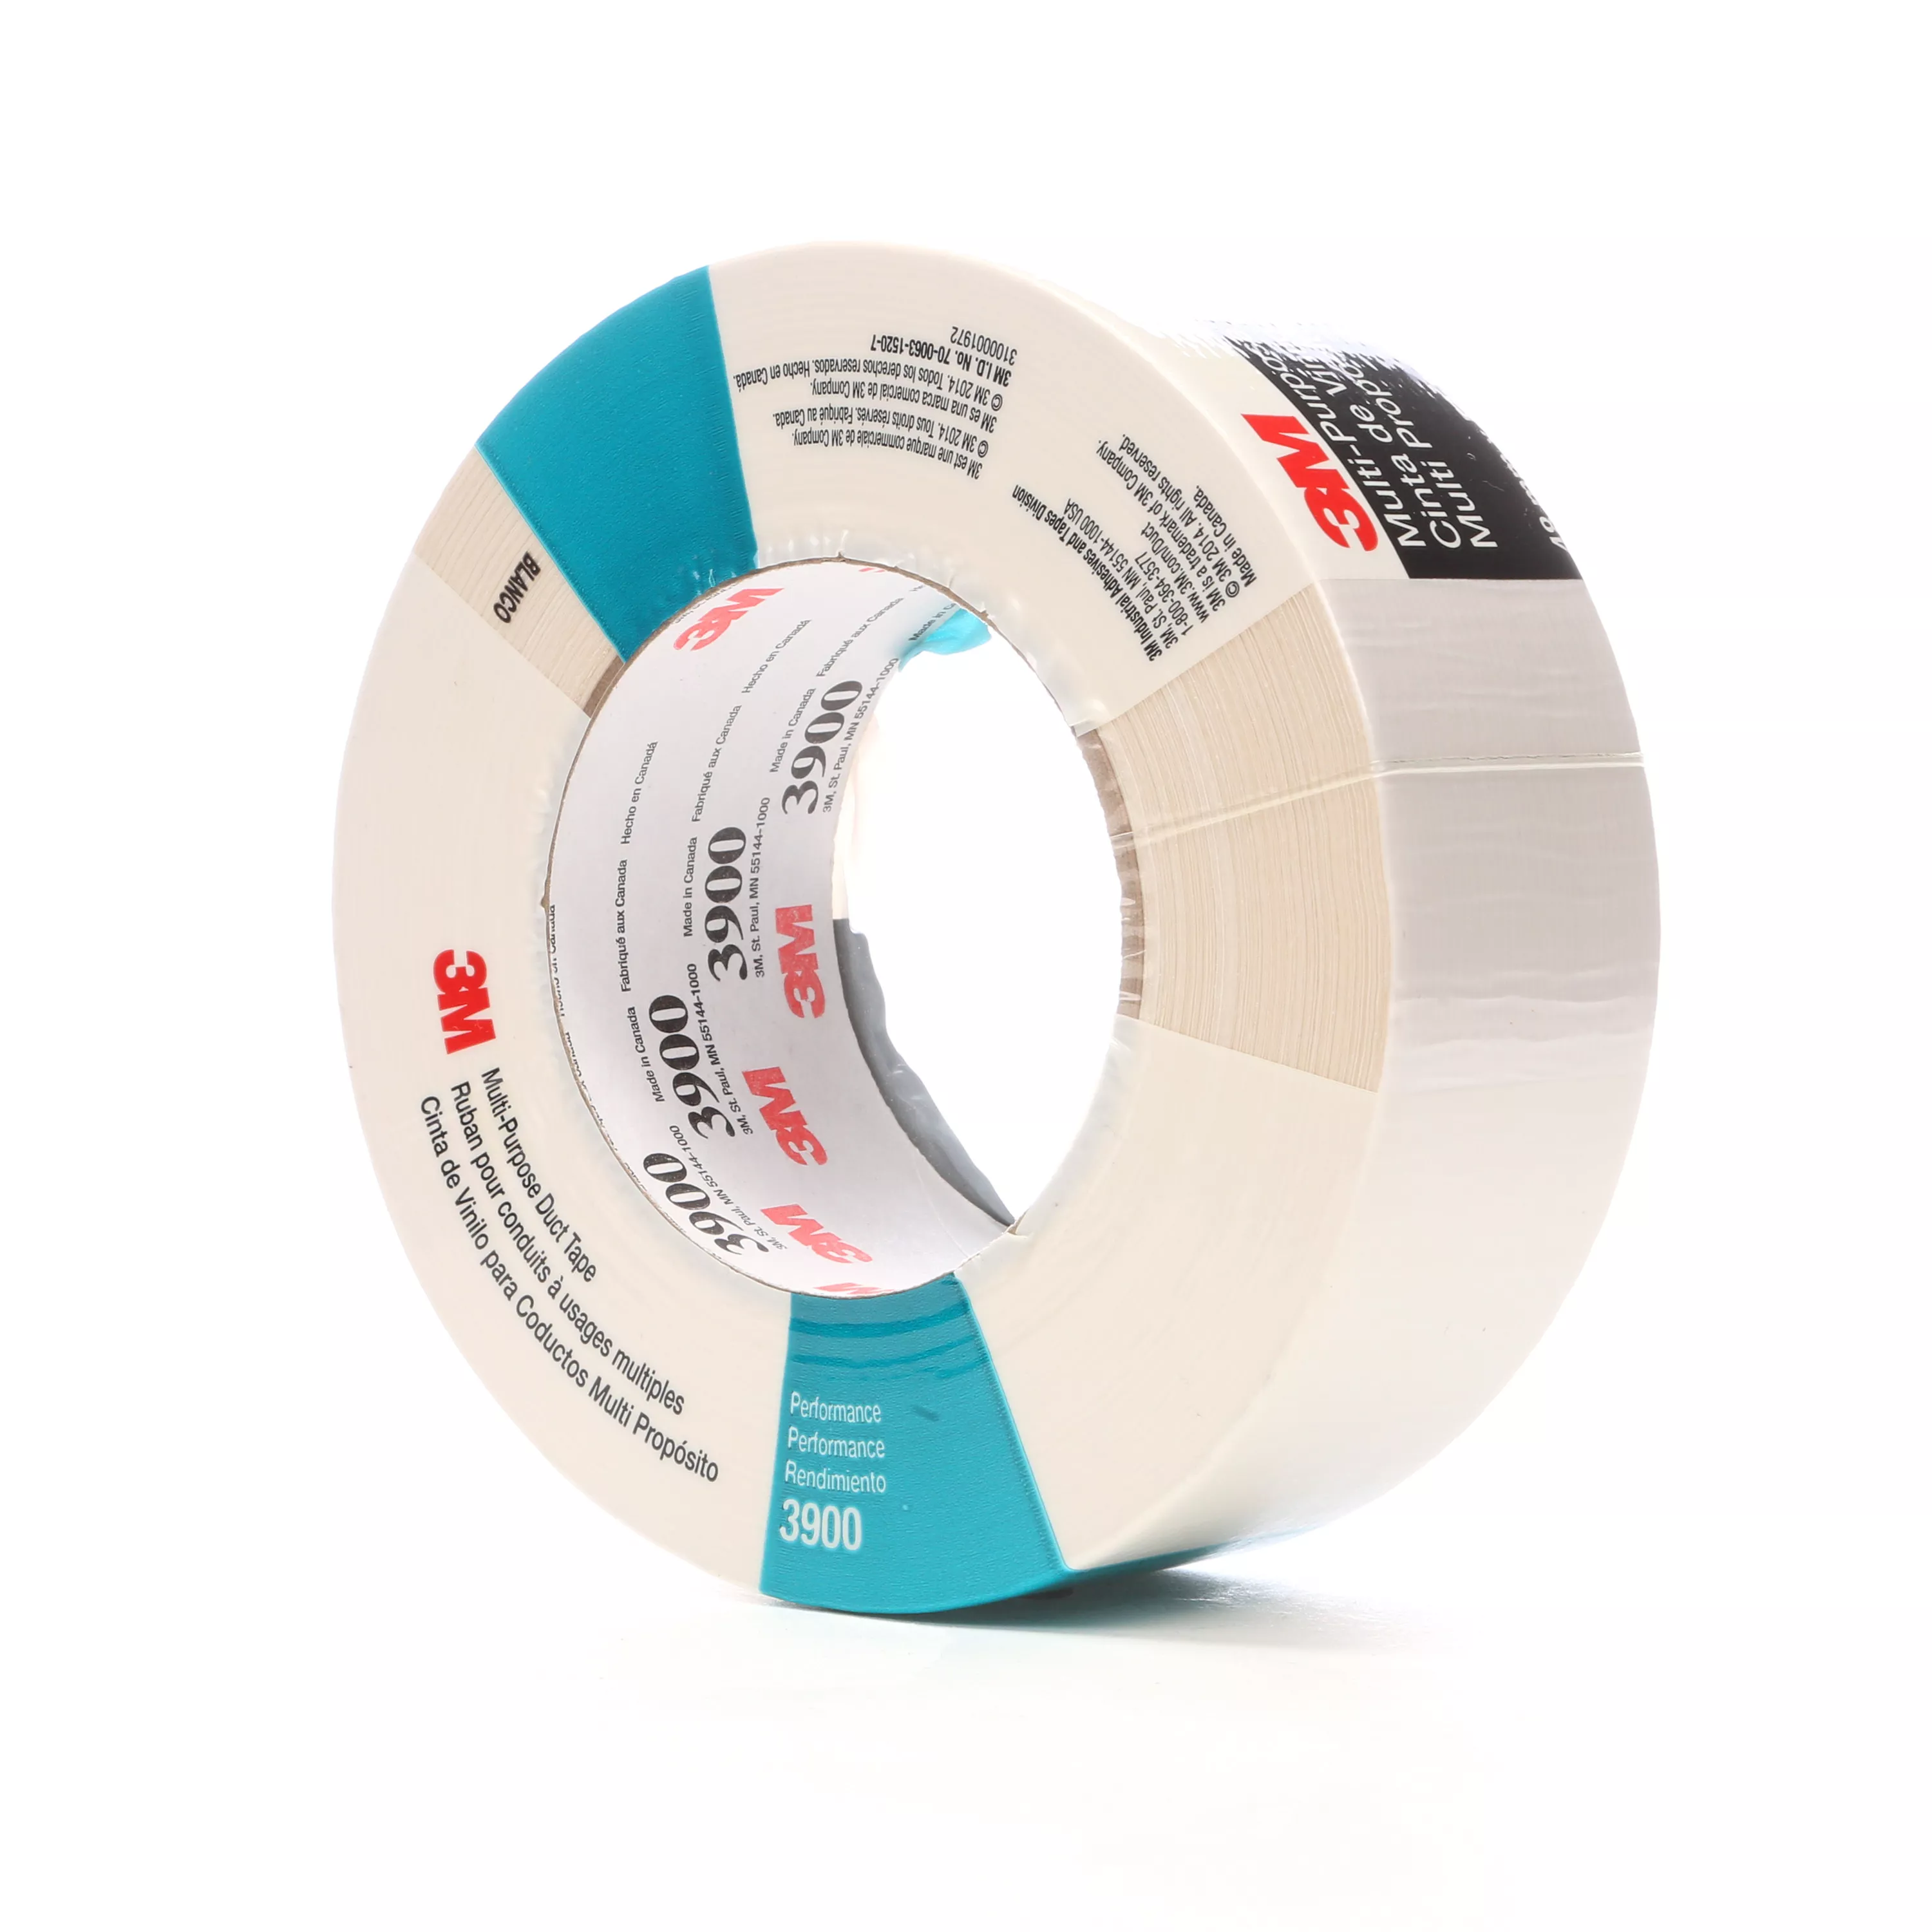 3M™ Multi-Purpose Duct Tape 3900, White, 48 mm x 54.8 m, 7.6 mil, 24
Roll/Case, Individually Wrapped Conveniently Packaged